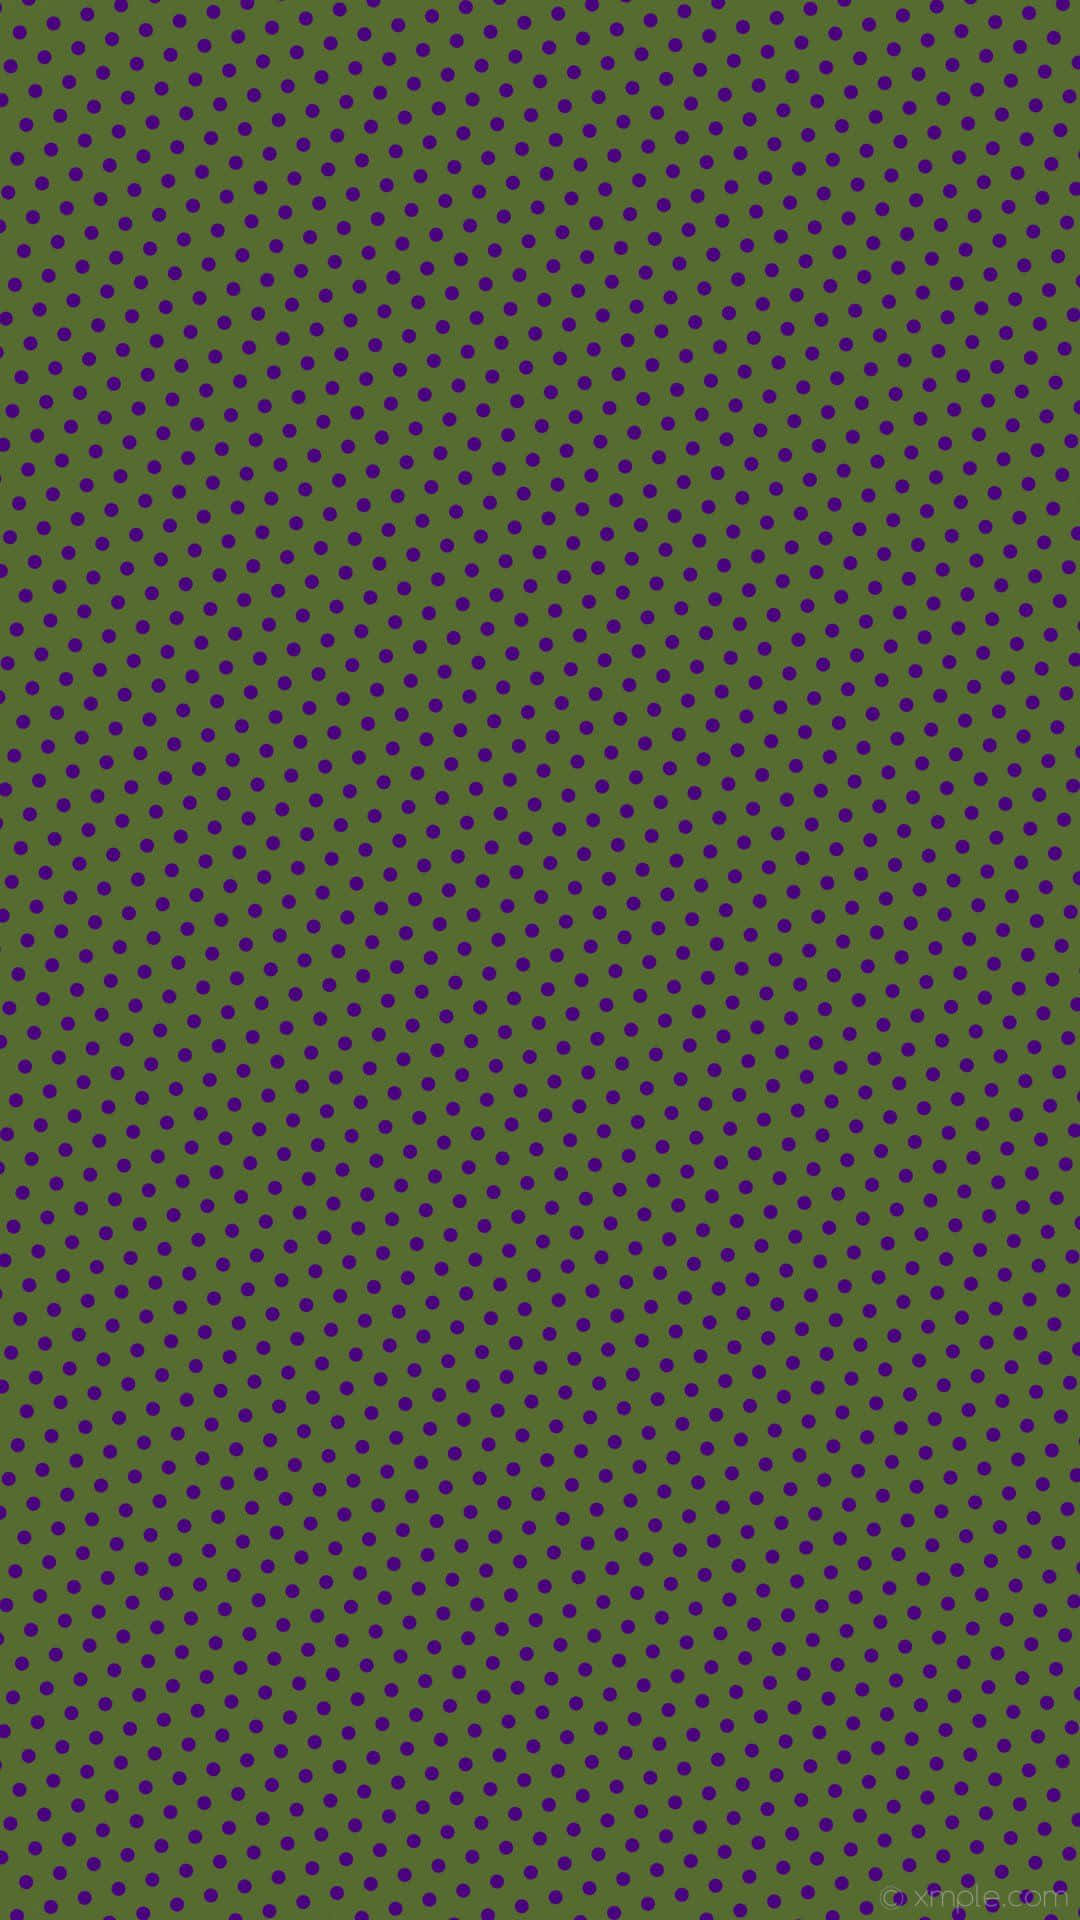 Get the new and stylish Olive Green Iphone Wallpaper